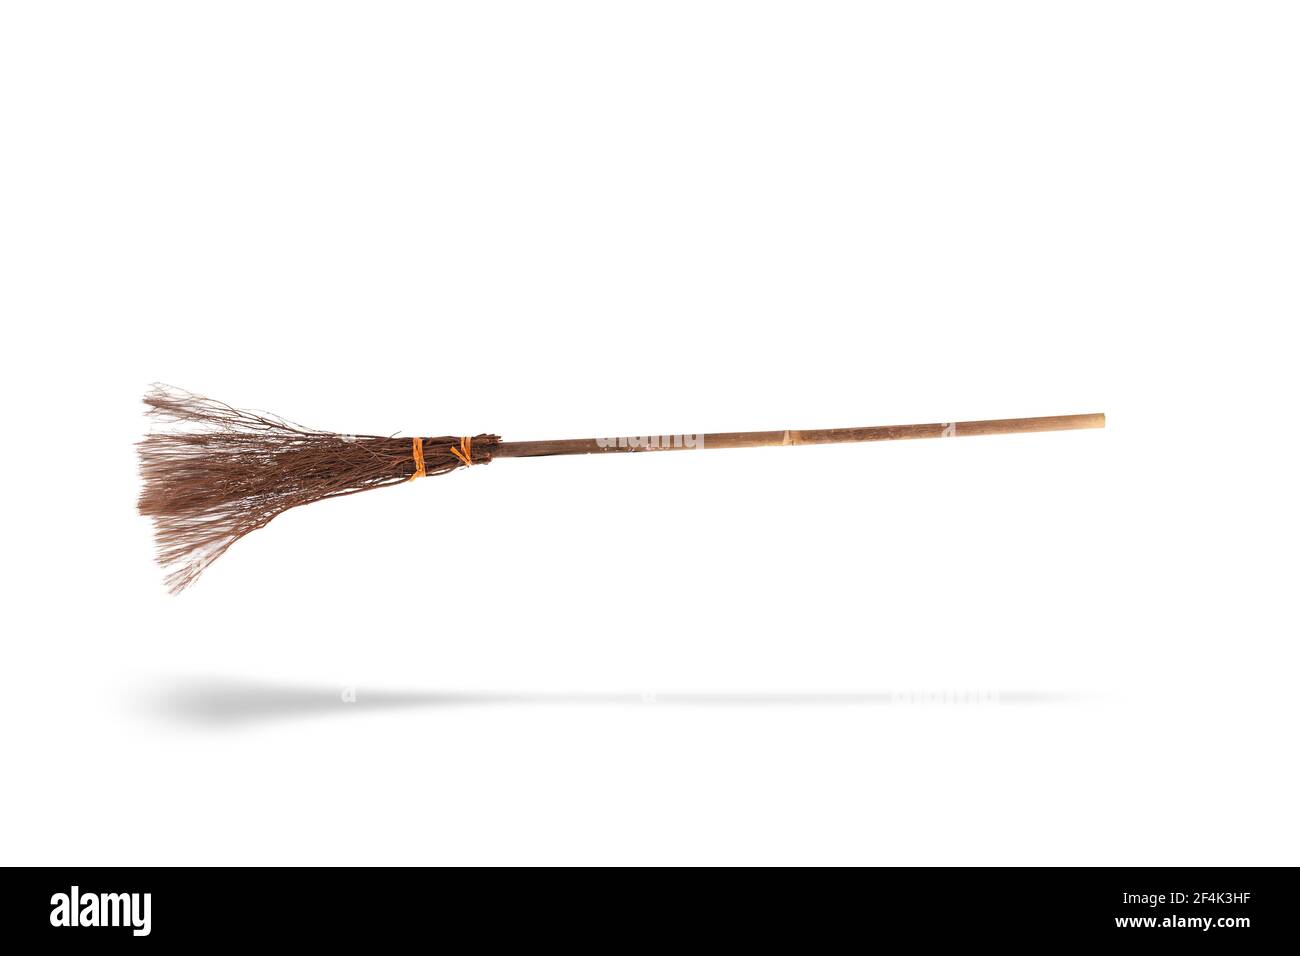 Download Picture Of A Broomstick Nomer 39